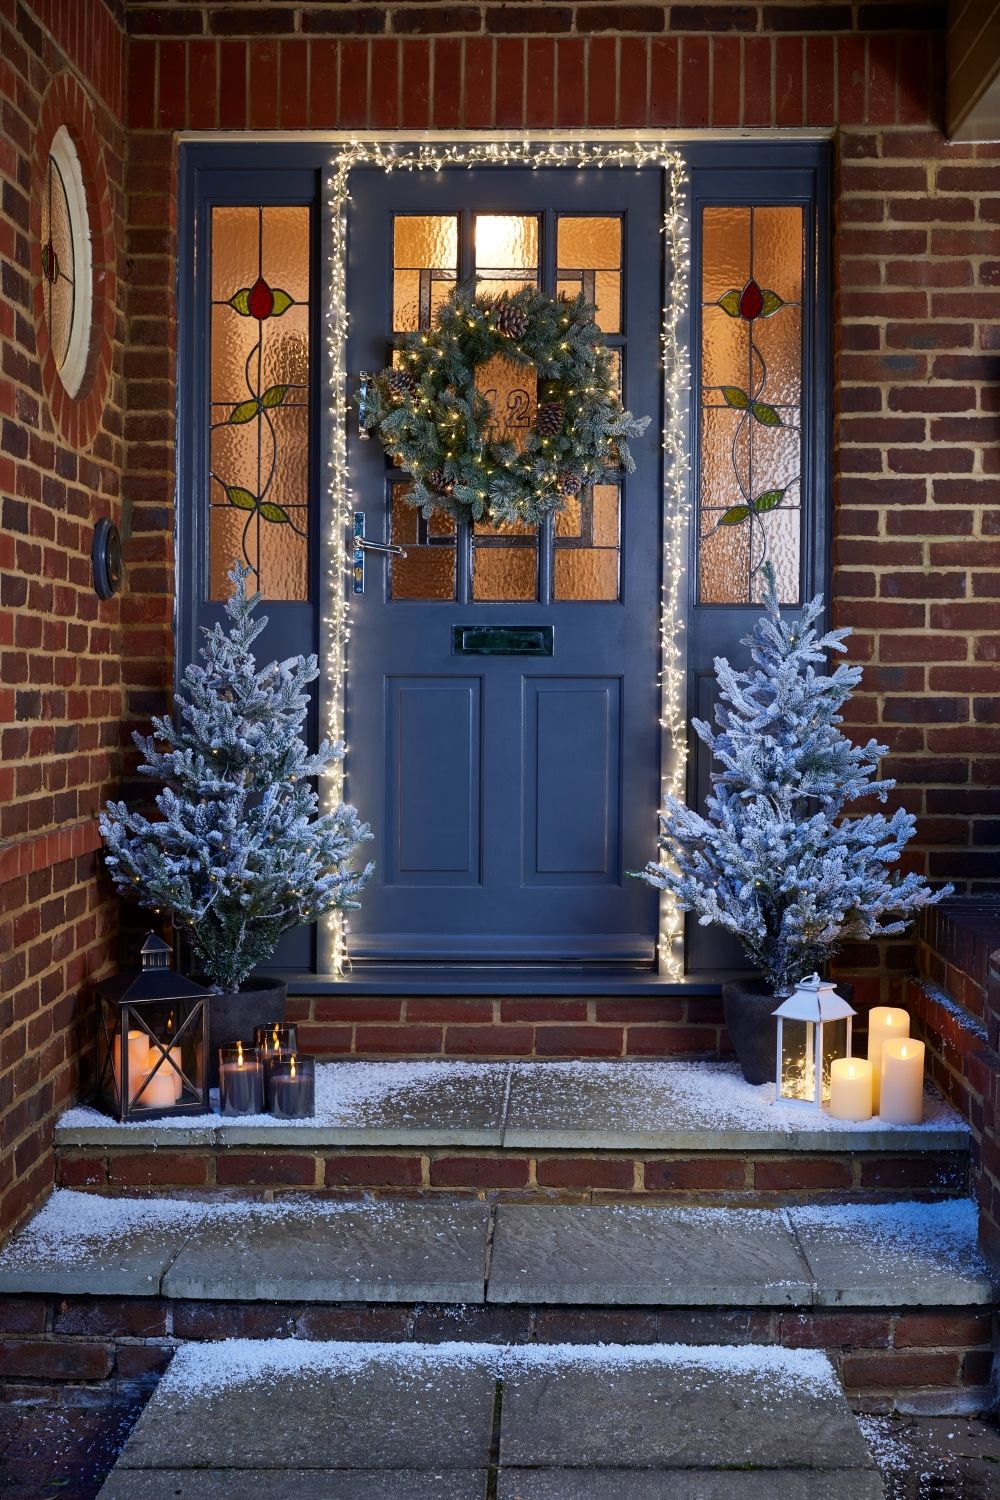 Christmas Door Decorations For Your Home - Christmas 2021